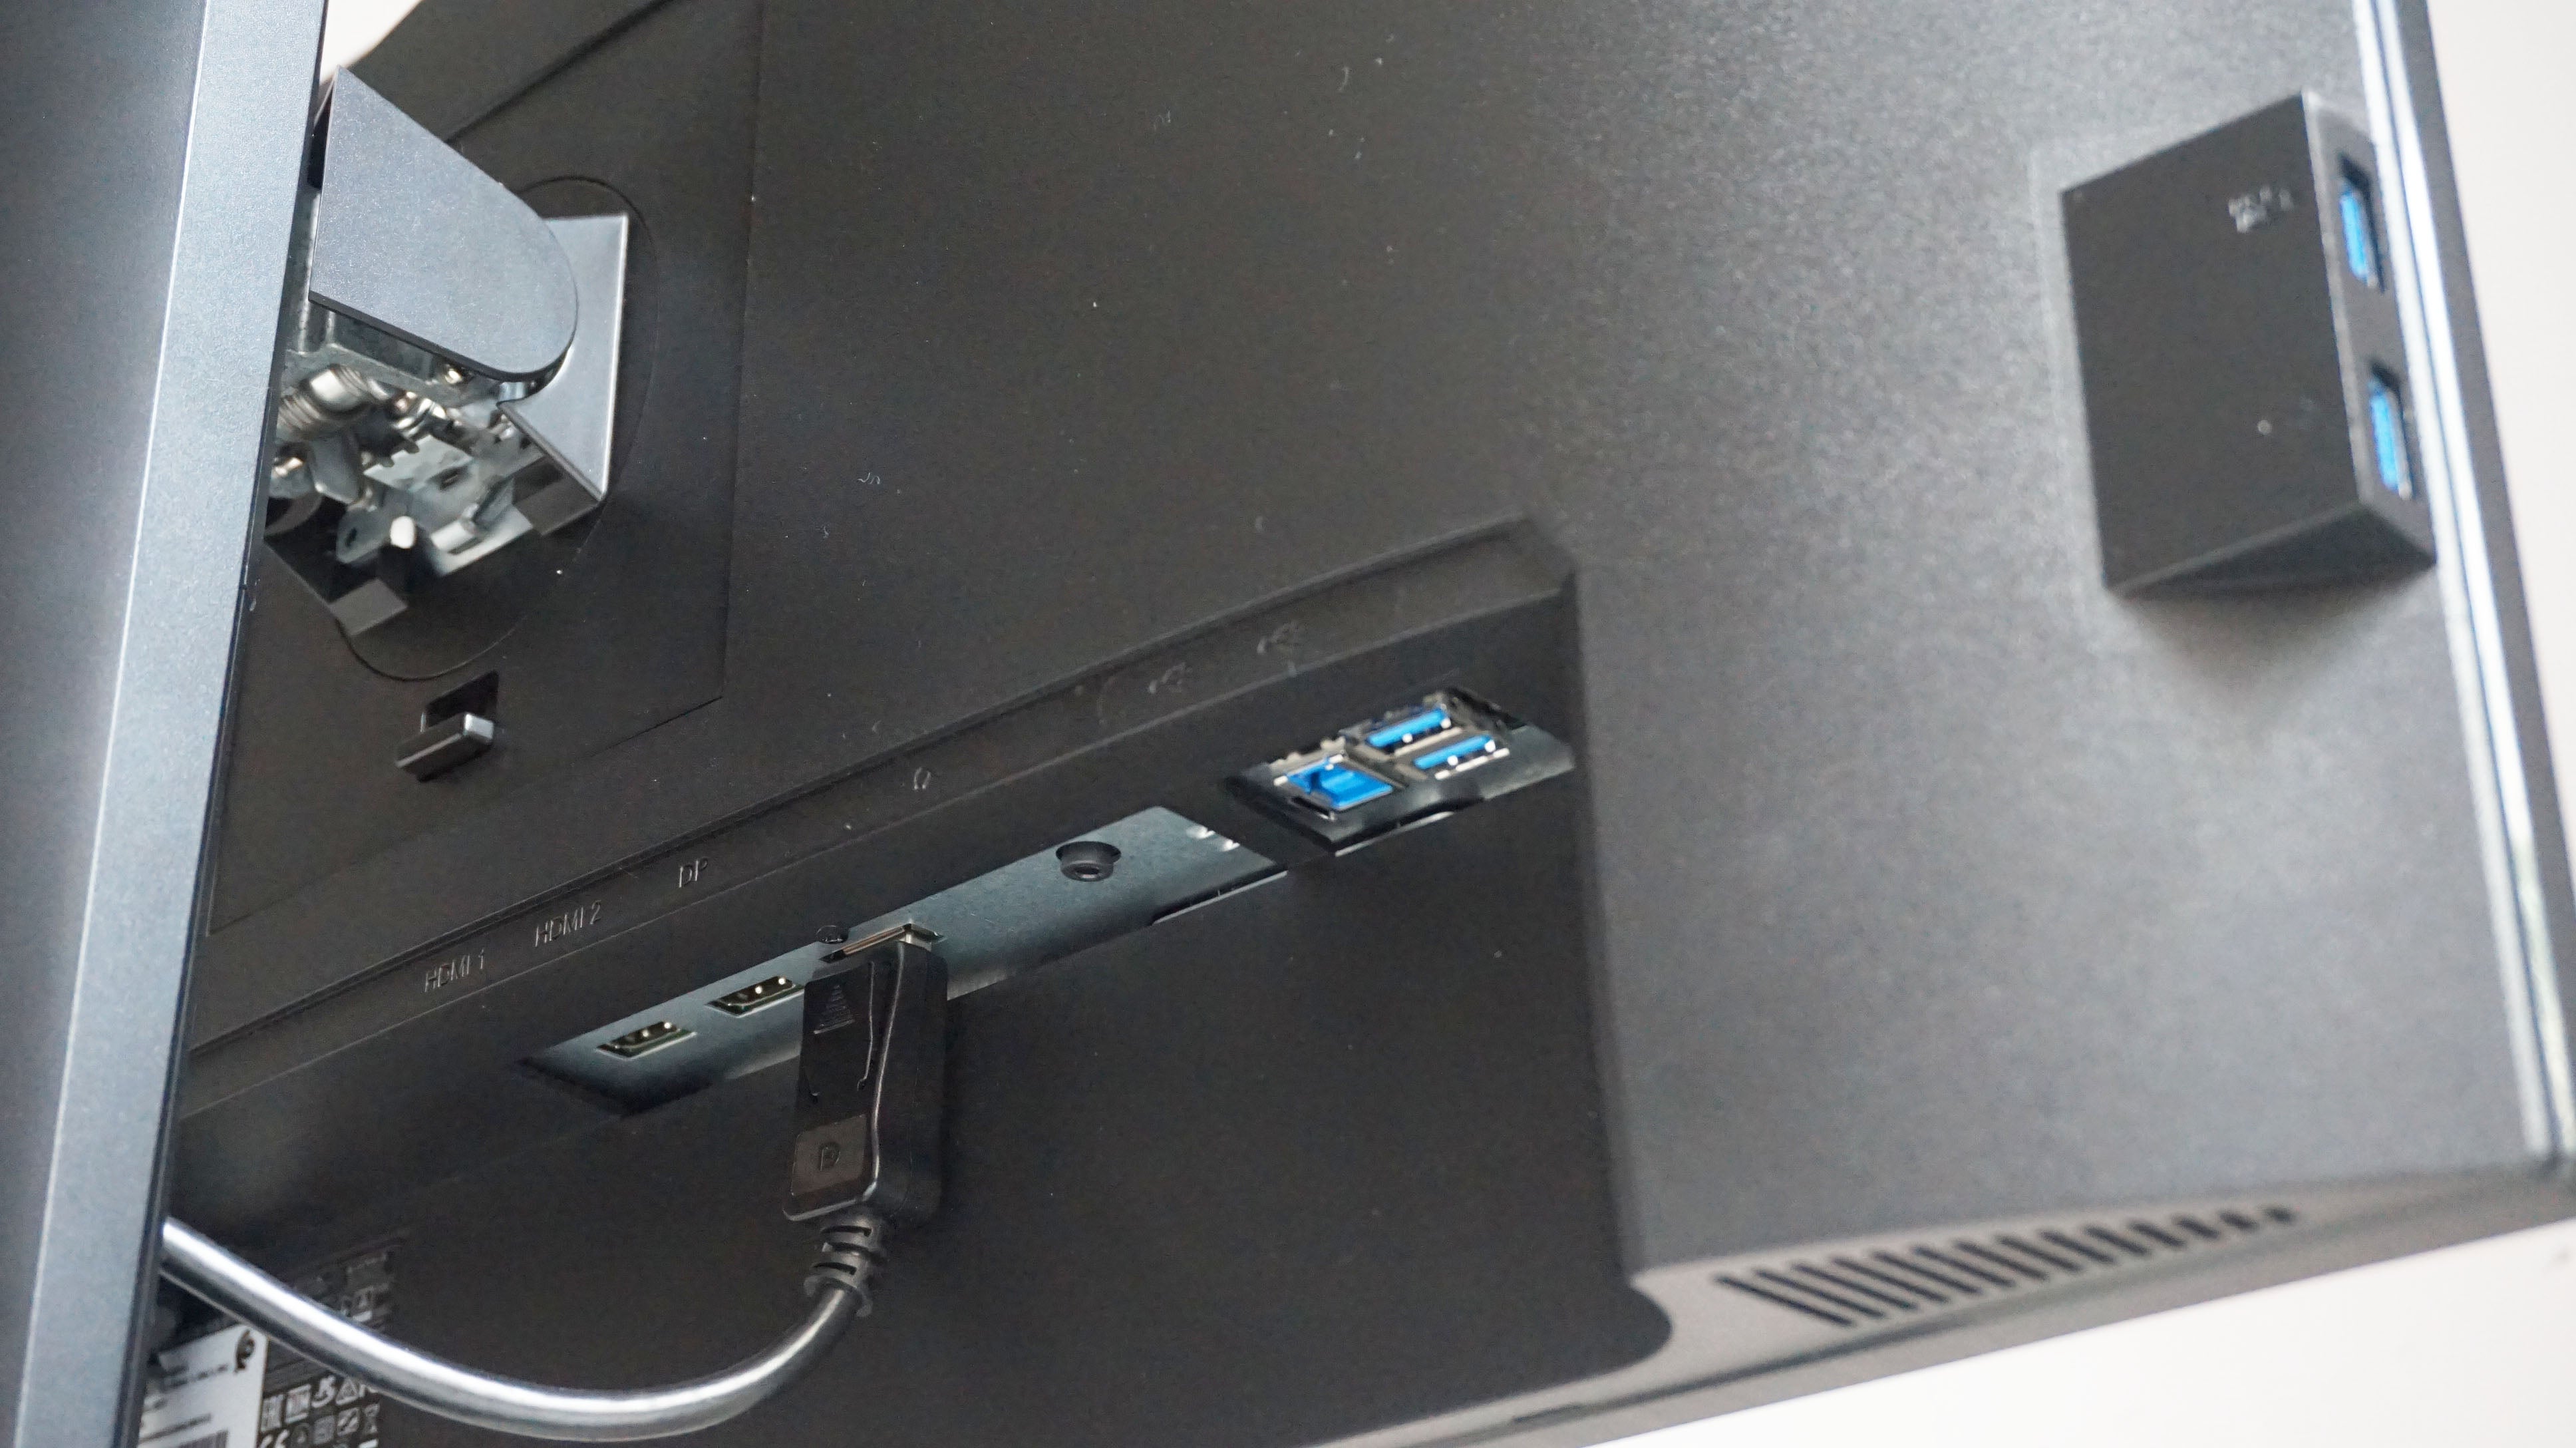 A photo of the Acer Predator XB253Q gaming monitor's display inputs and USB hub